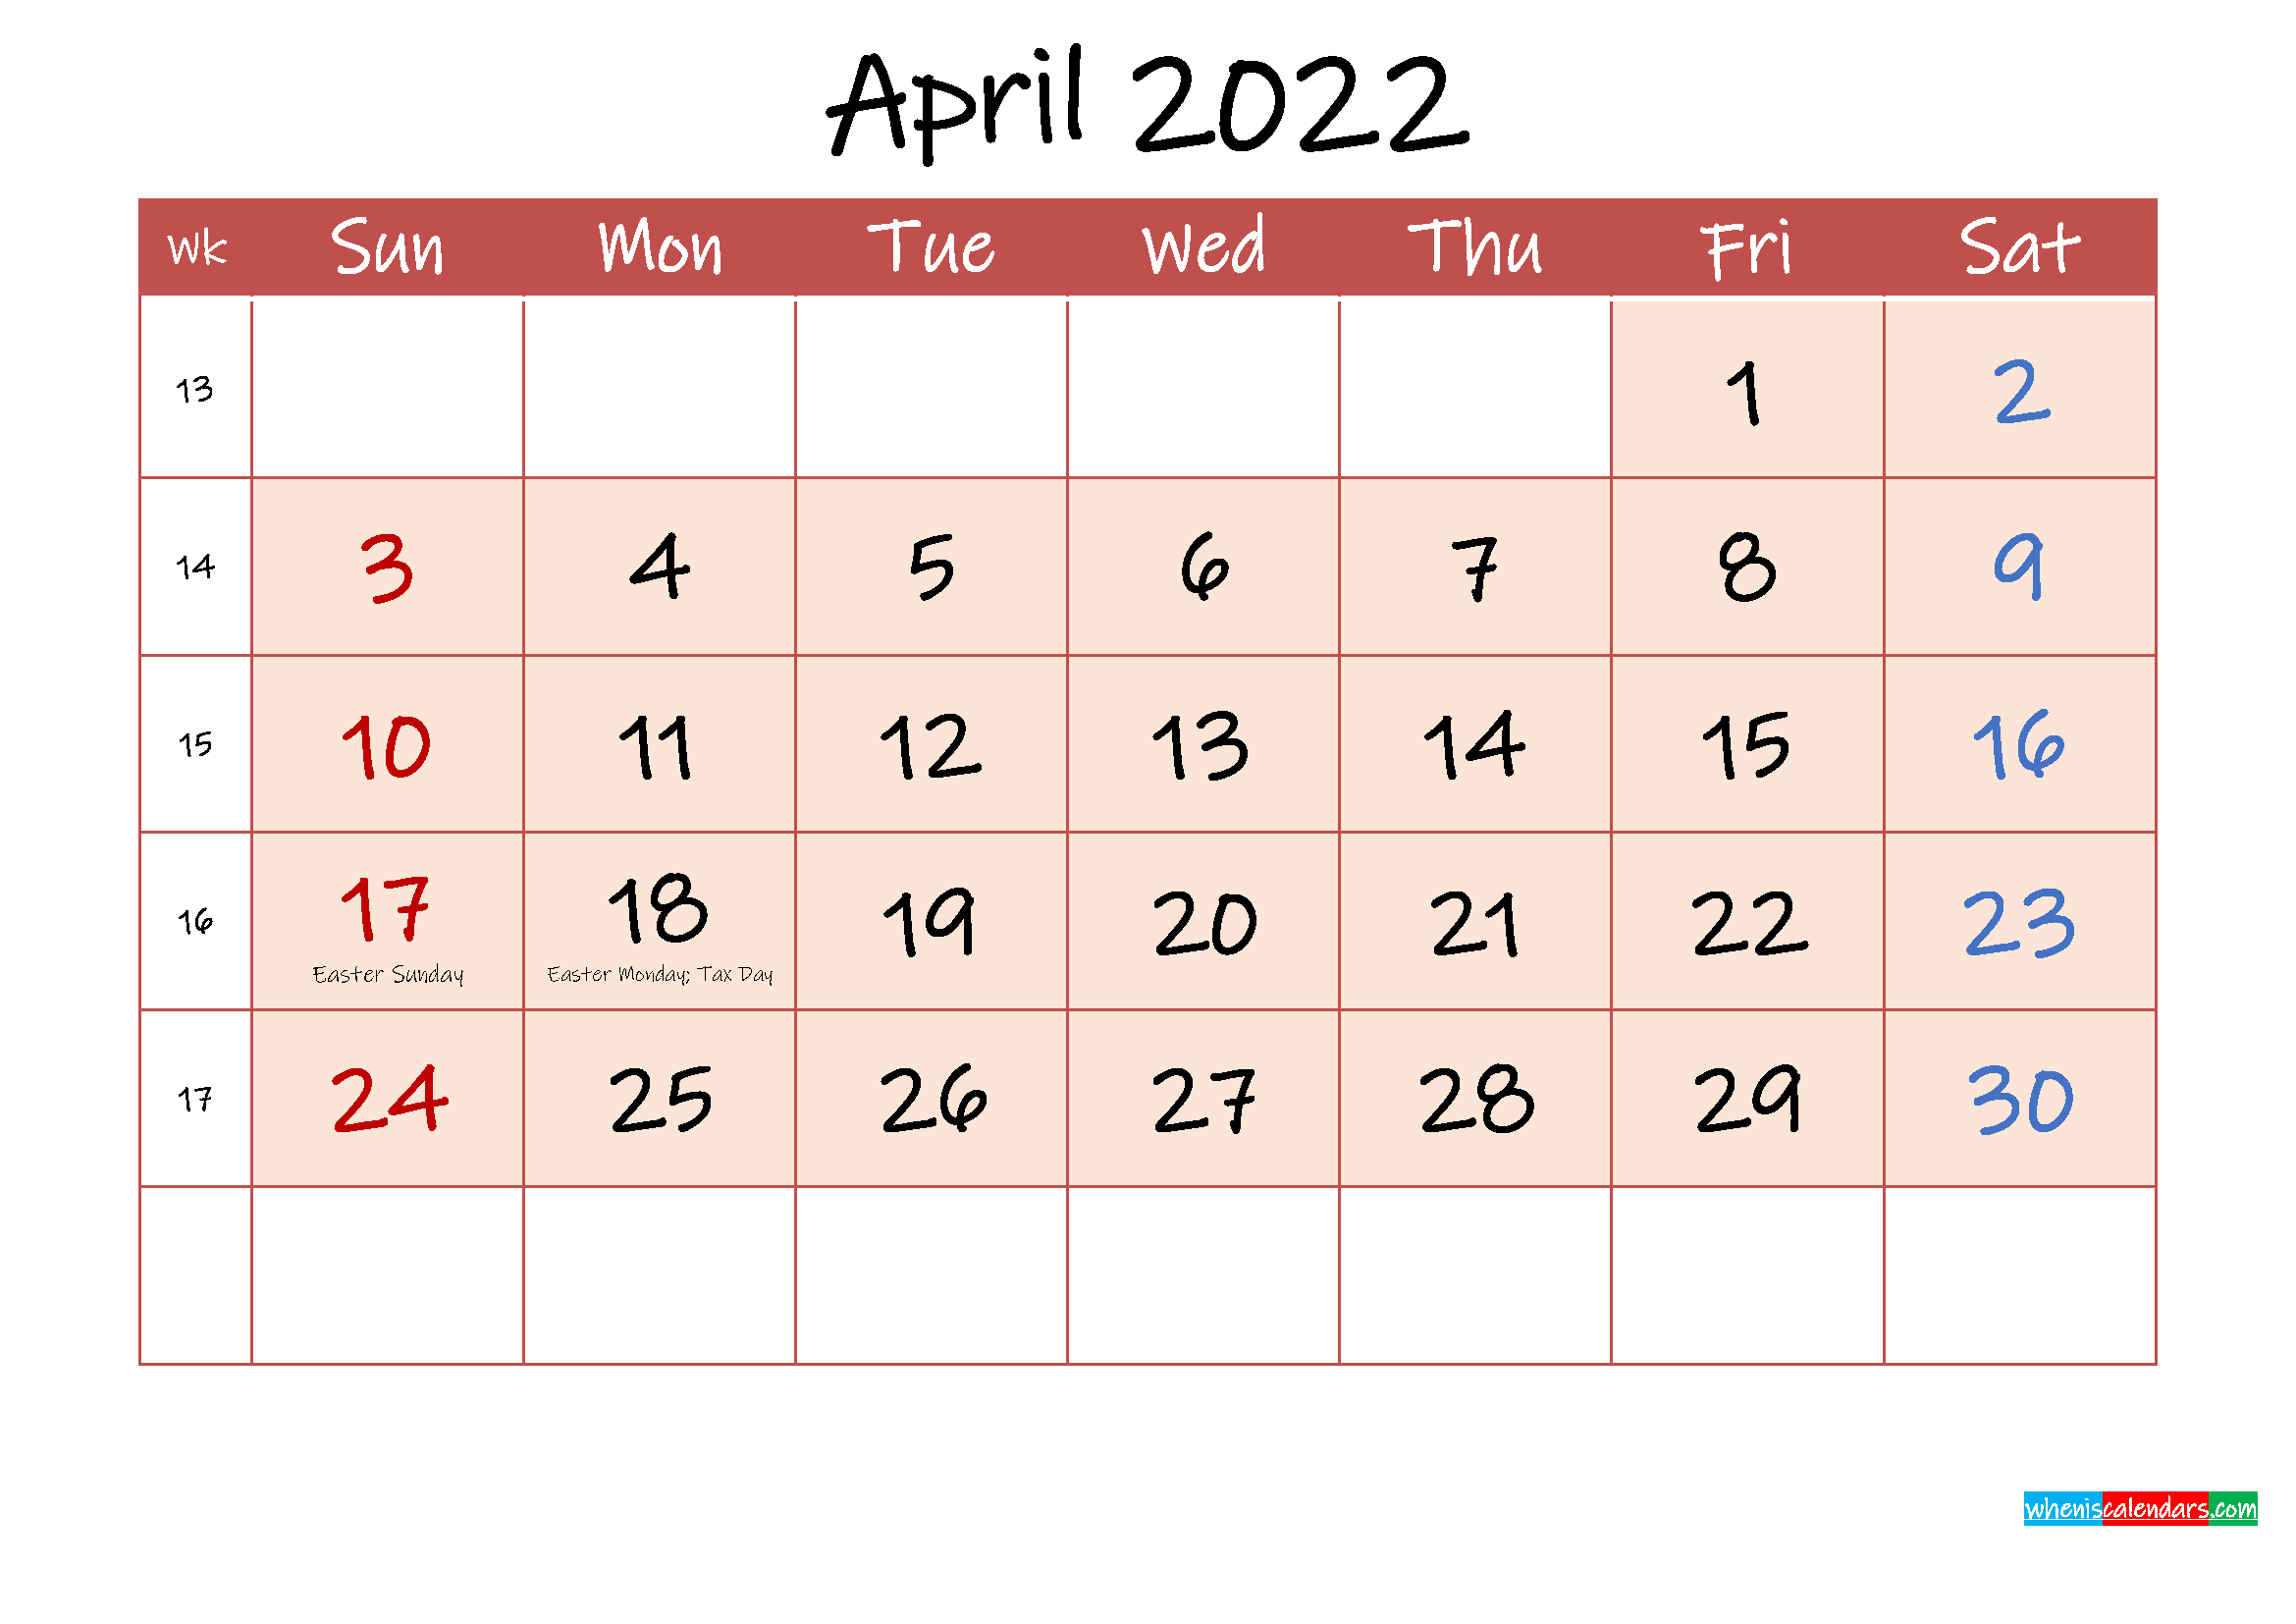 April 2022 Free Printable Calendar With Holidays - Template Ink22m112